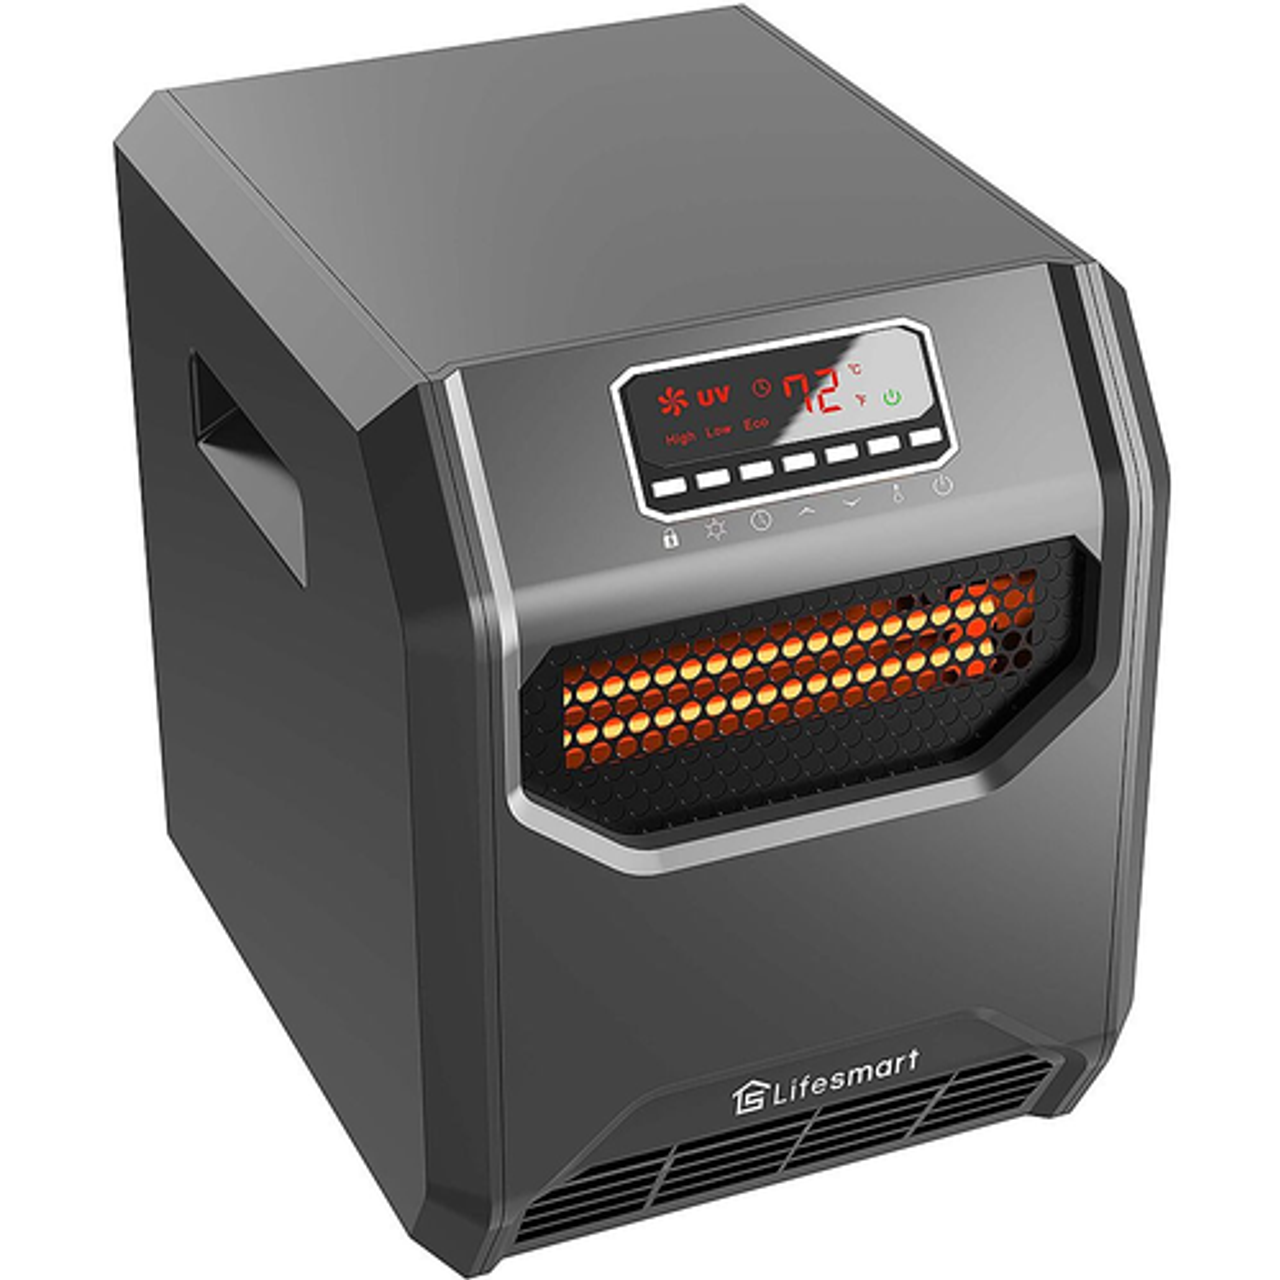 Lifesmart - 6-Element Infrared Heater with Front Intake Vent and UV Light - Black